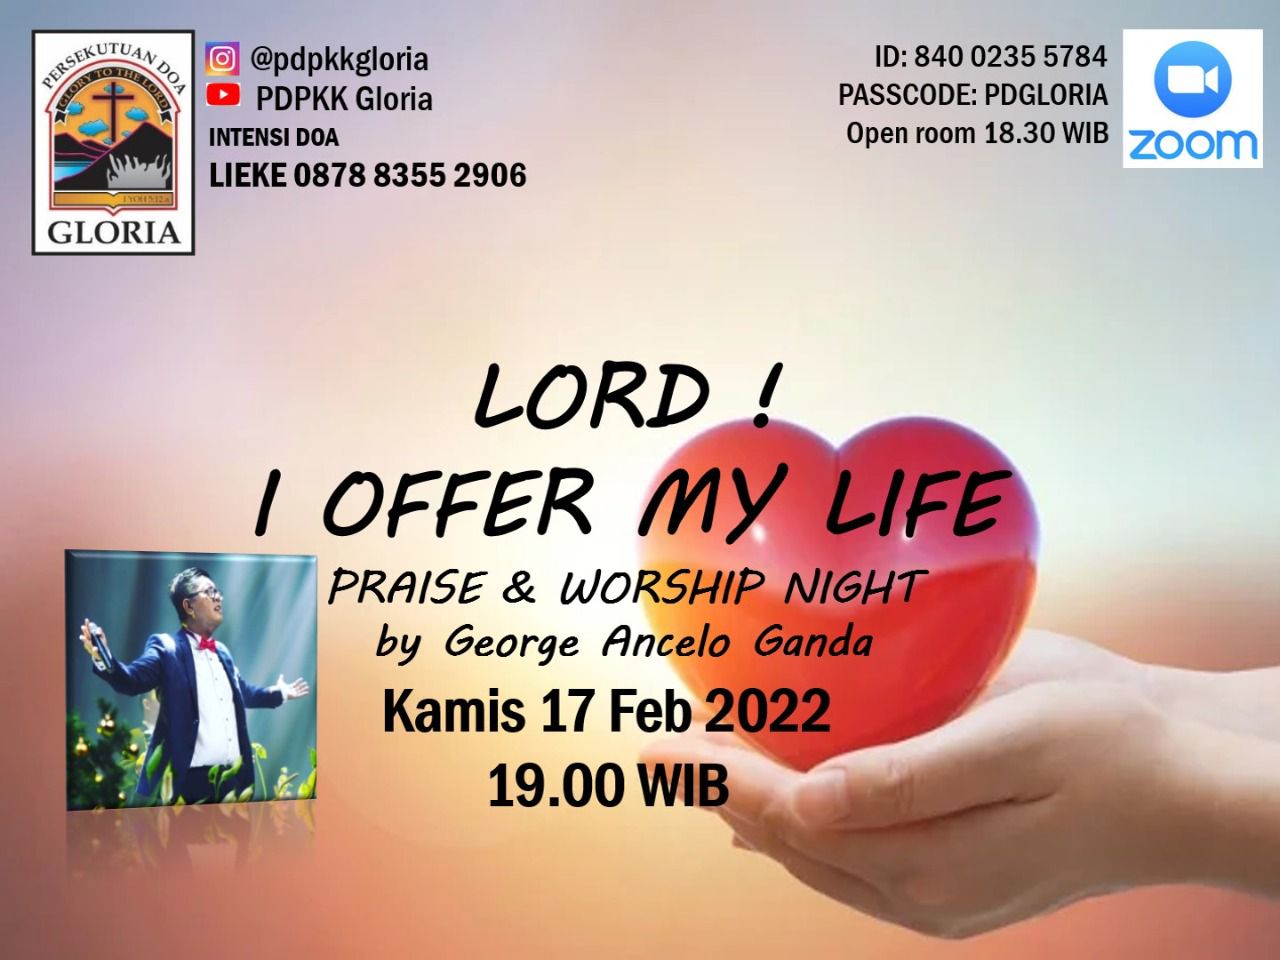 LORD! I OFFER MY LIFE